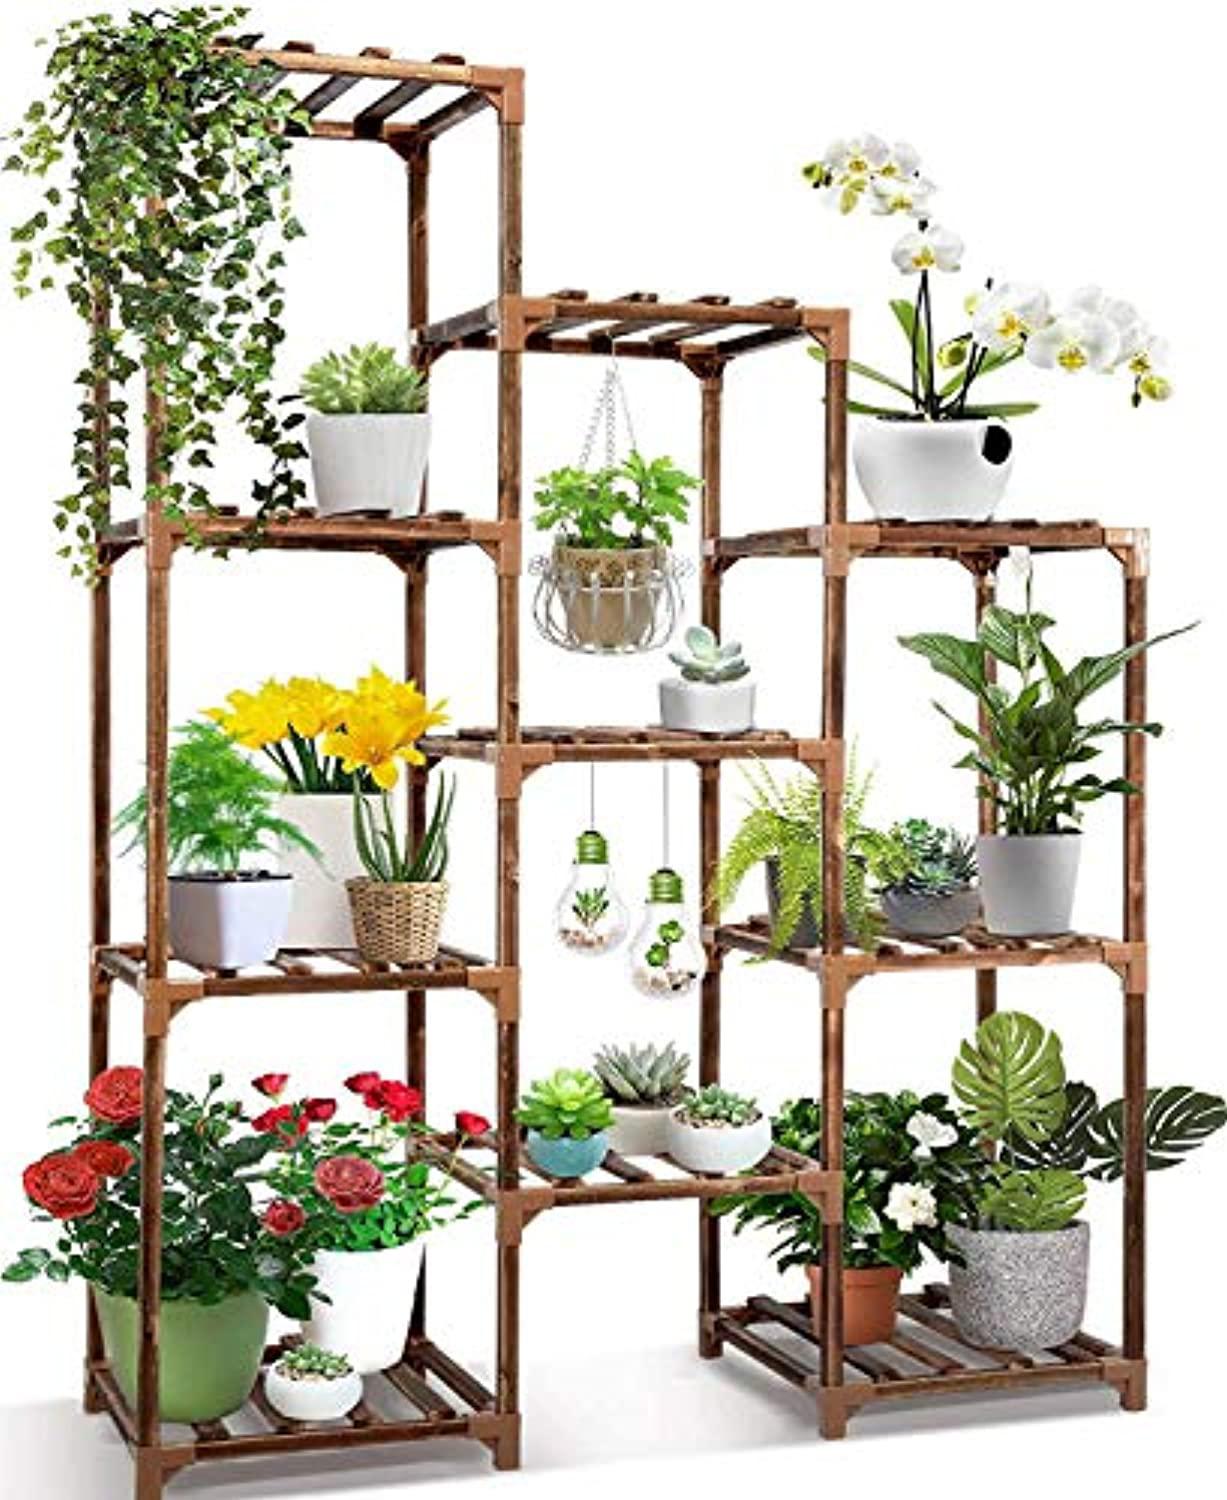 CFMOUR plant stand indoor outdoor,cfmour 10 tire tall large wood plant shelf multi tier flower stands,garden shelves wooden plant di